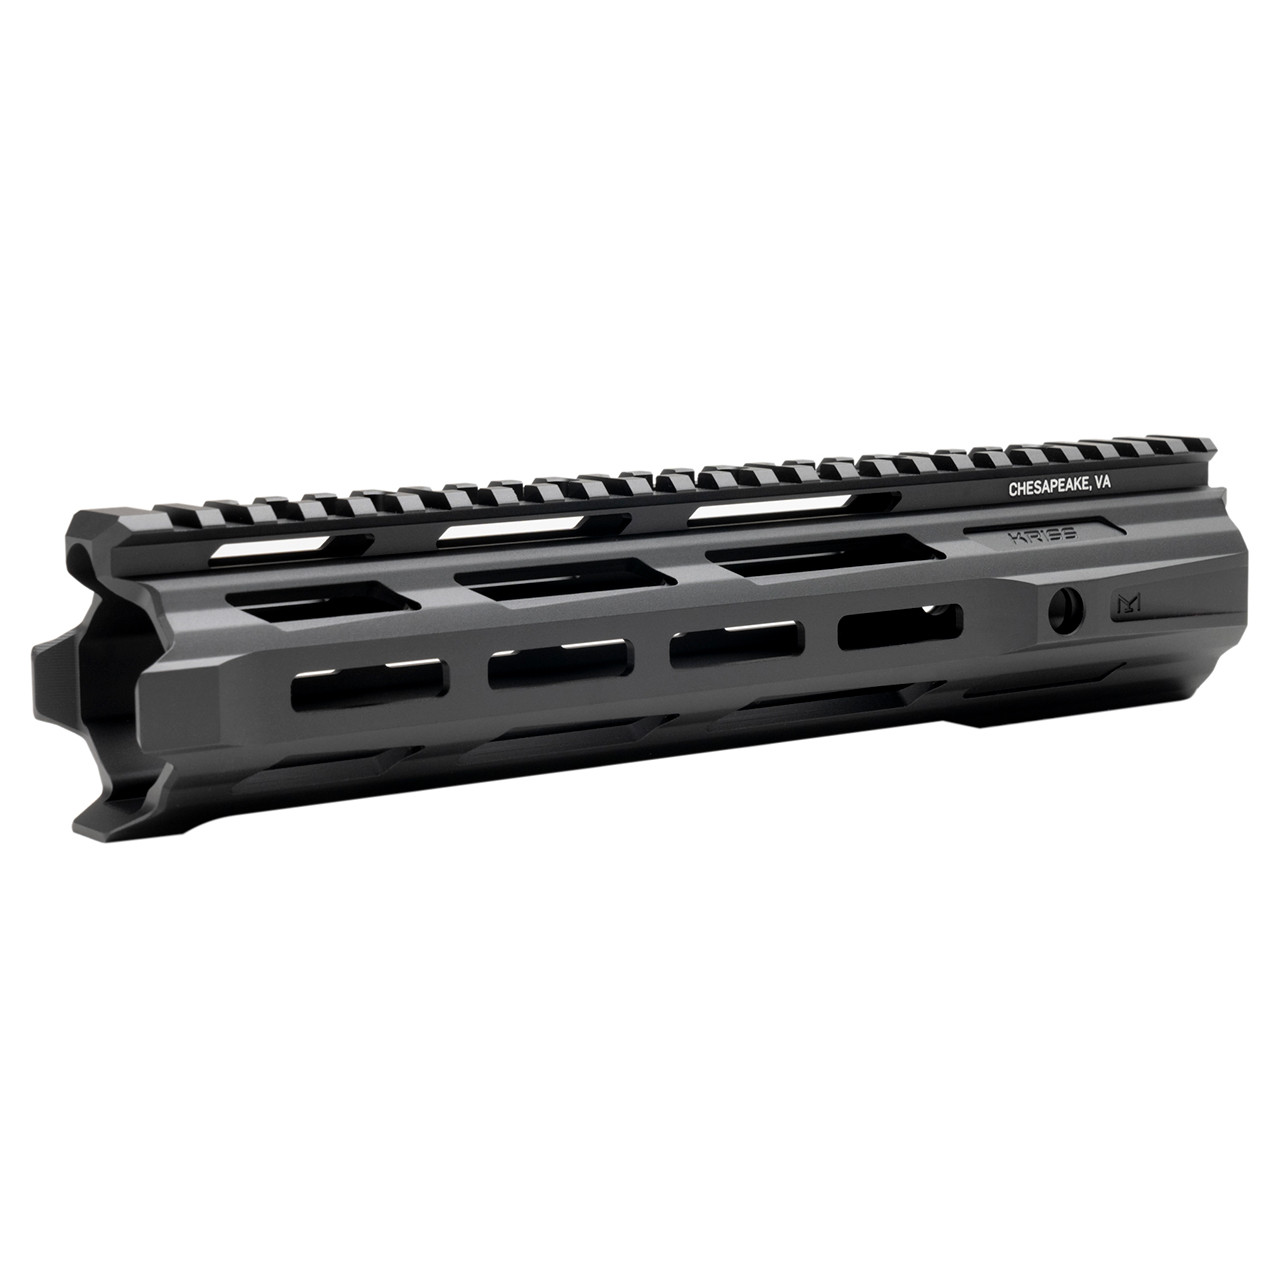 Shop Trident TR210 Rail Assembly / Black - $ 125 - Krytac.com | For Airsoft Use Only.